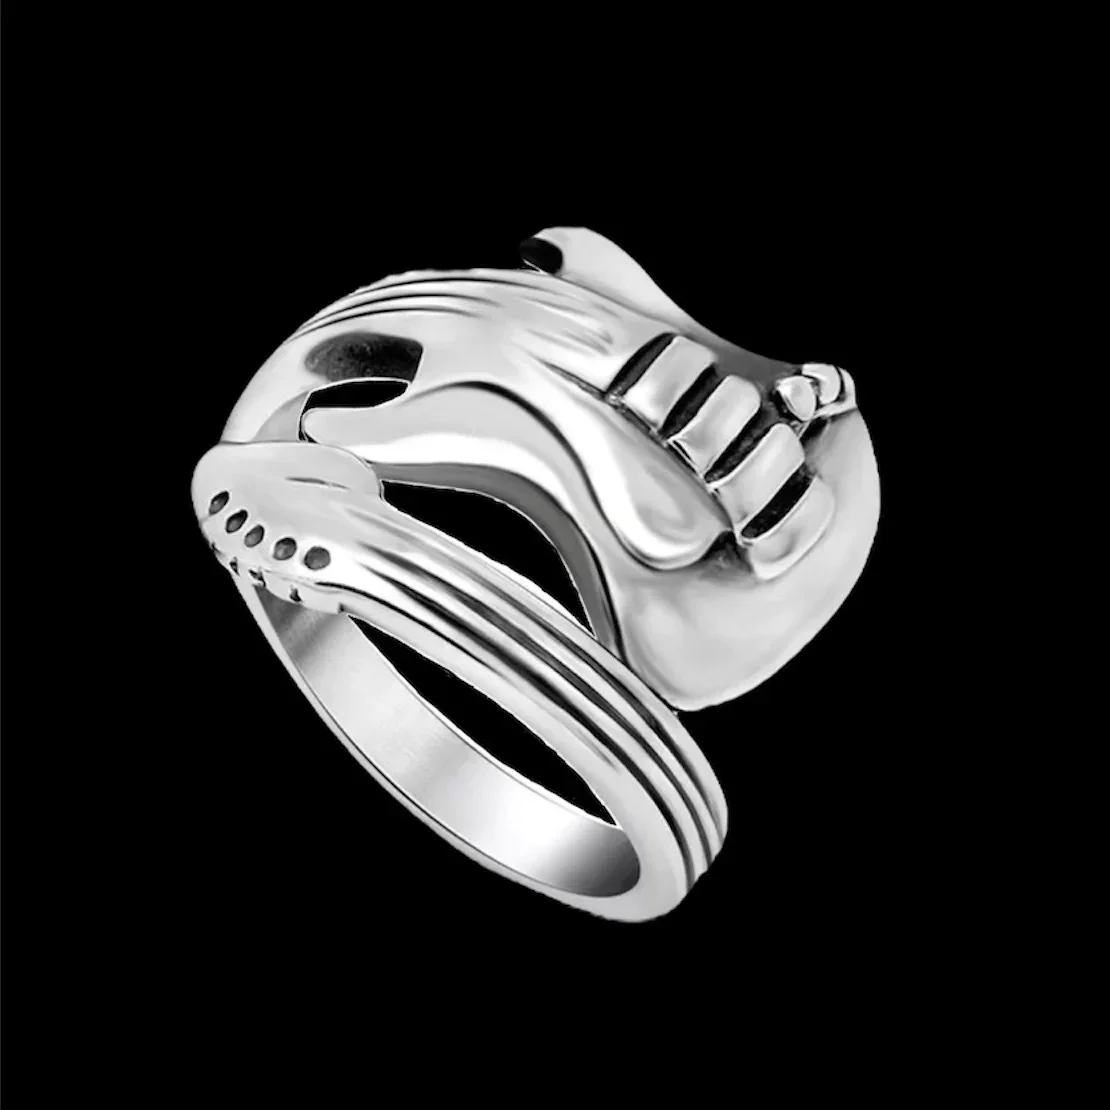 Hot selling Retro Punk Personality Titanium steel Music Guitar ring Men Women fashion Opening Ring Jewelry Party Gift Wholesale